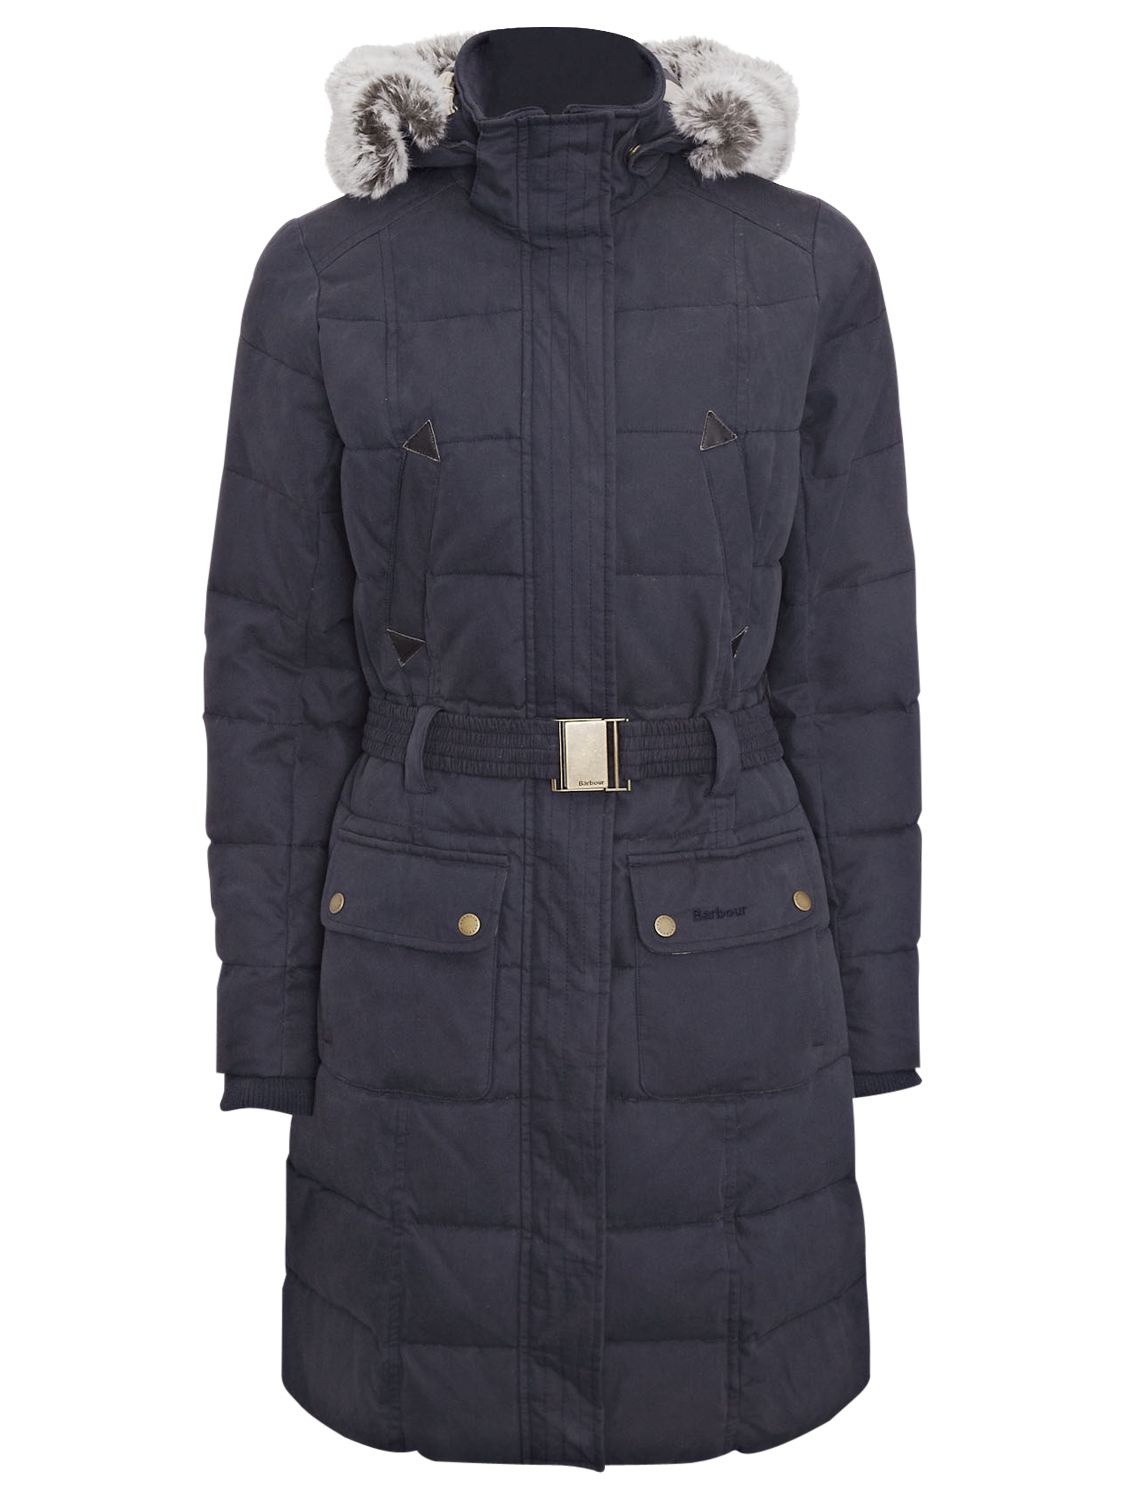 Barbour Belton Quilted Jacket, Navy at 